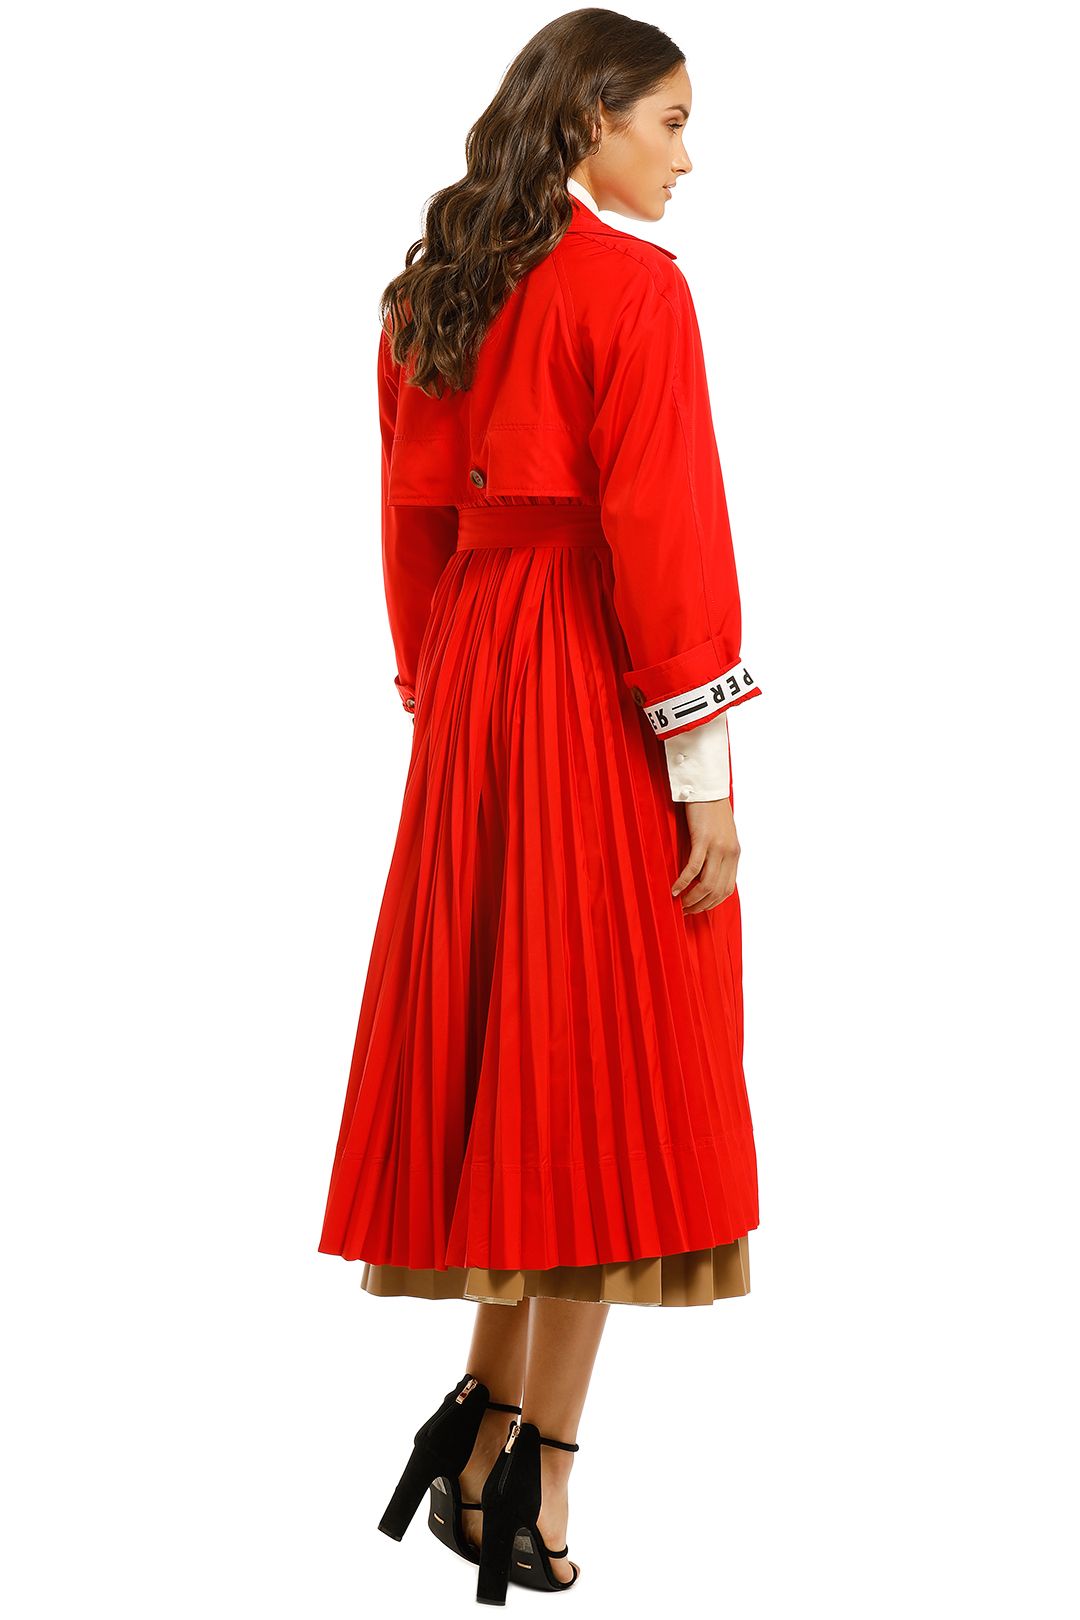 Cooper-by-Trelise-Cooper-Pleating-Weather-Jacket-Red-Back